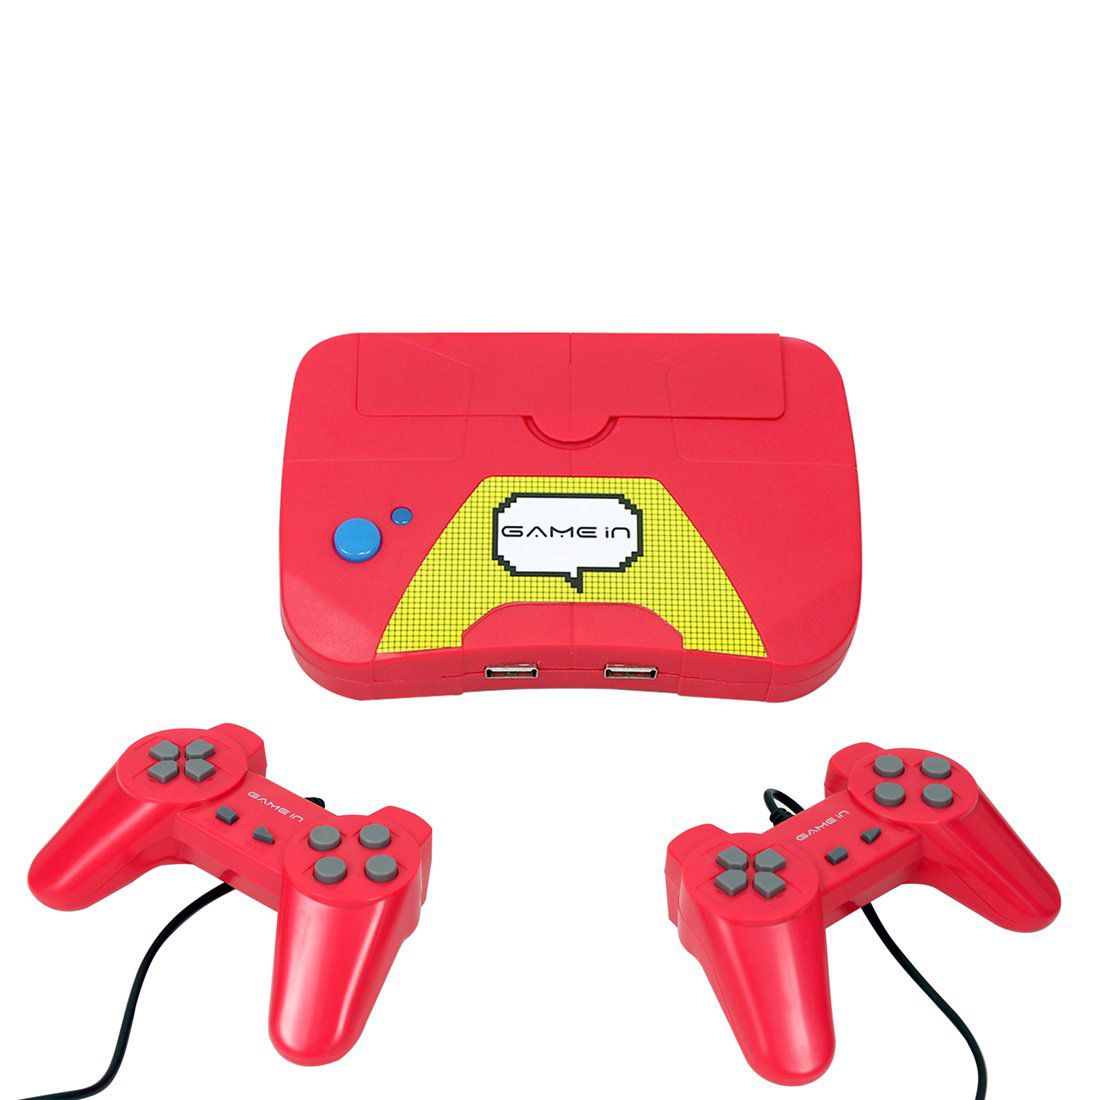 tv video game console buy online india